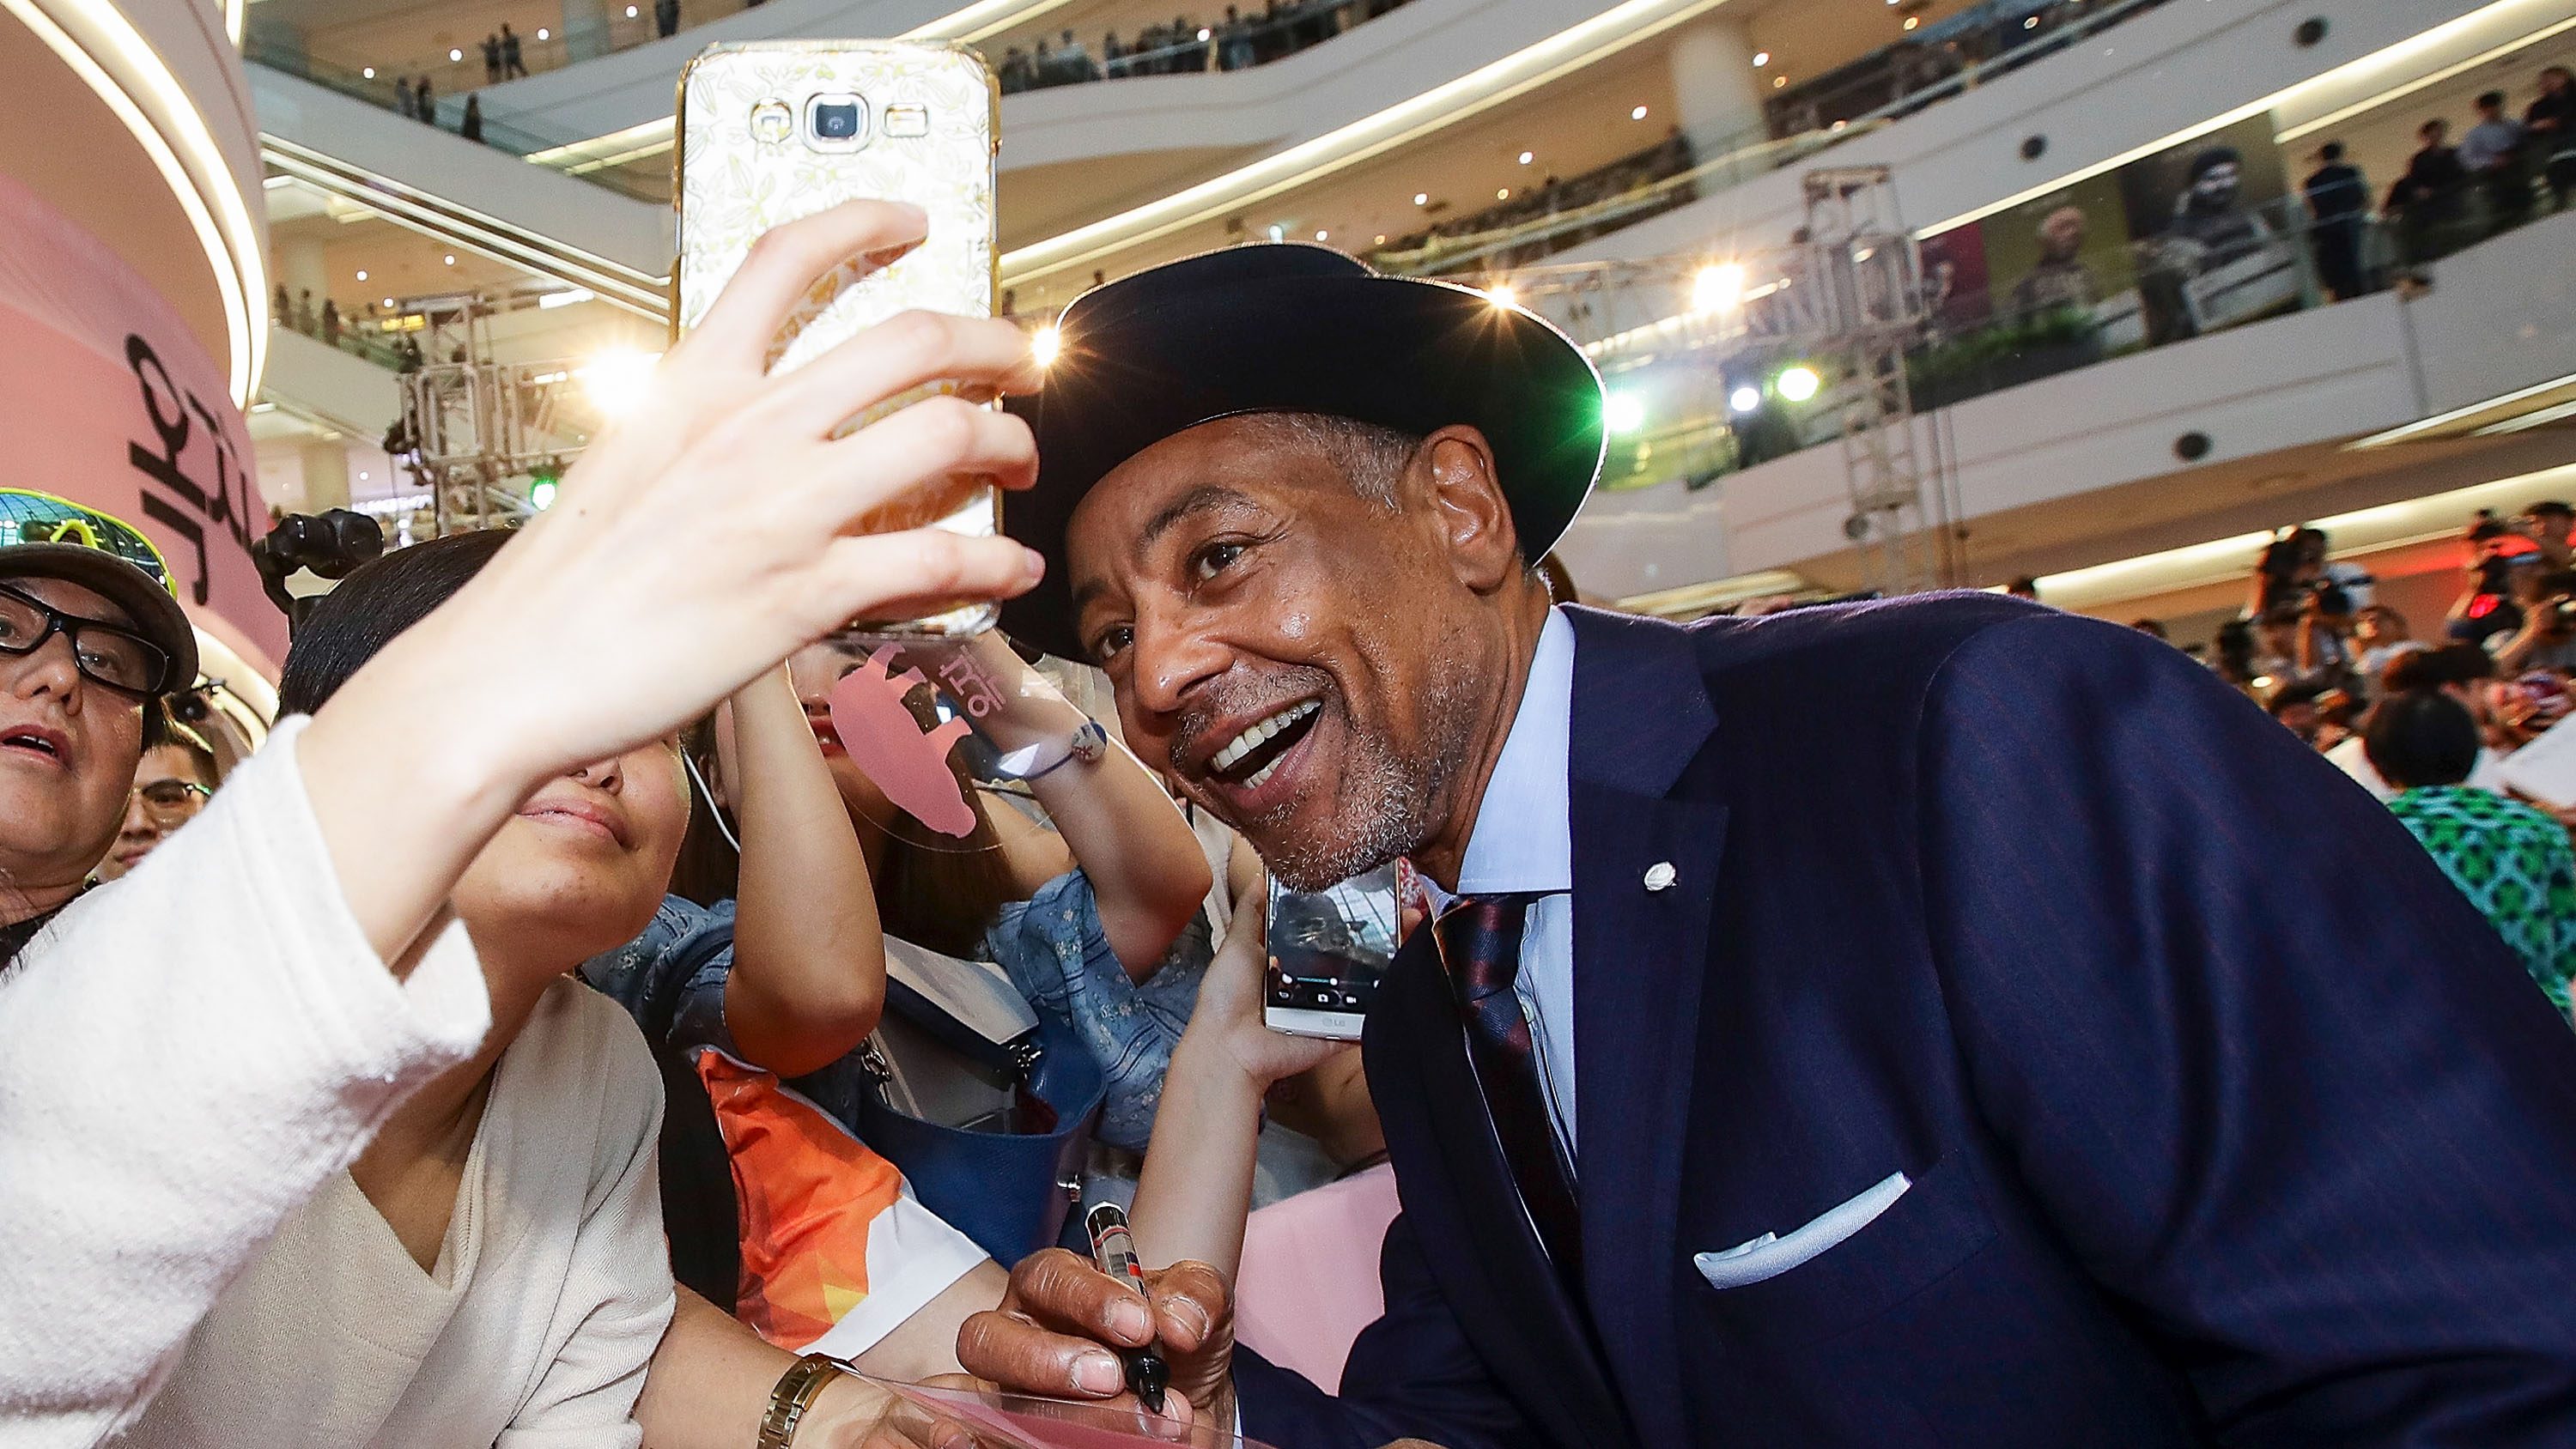 GIANCARLO ESPOSITO. Giancarlo Esposito takes a selfie with a fan at the Korean red carpet premiere of 'Okja.' Photo by Chung Sung-Jun/Getty Images for Netflix  